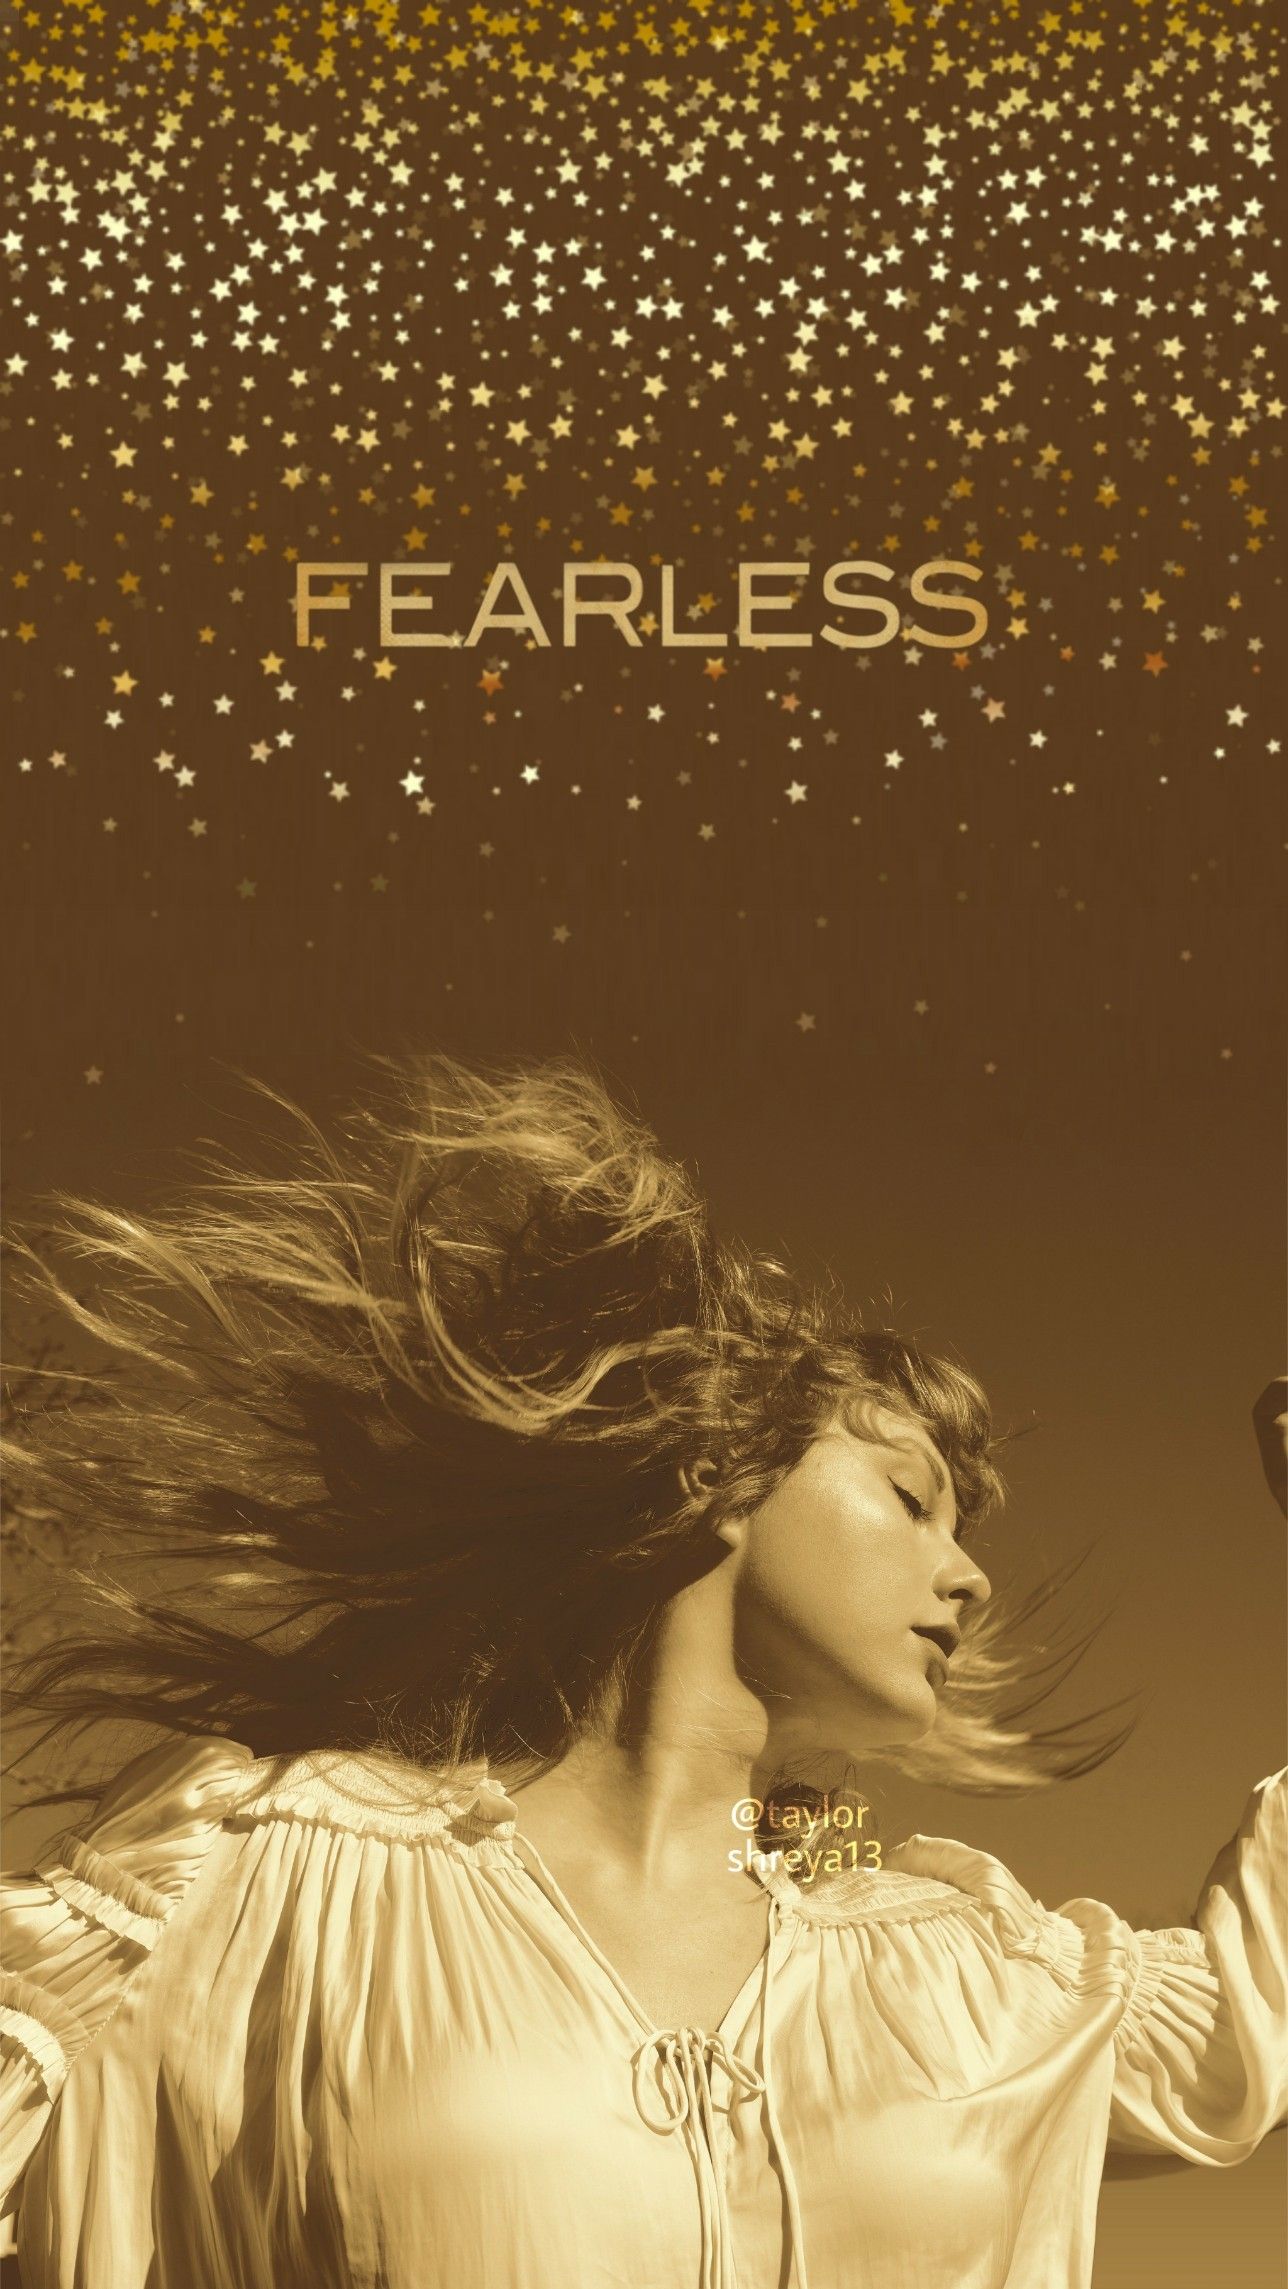 Fearless (Taylor's Version). Taylor swift posters, Taylor swift wallpaper, Taylor